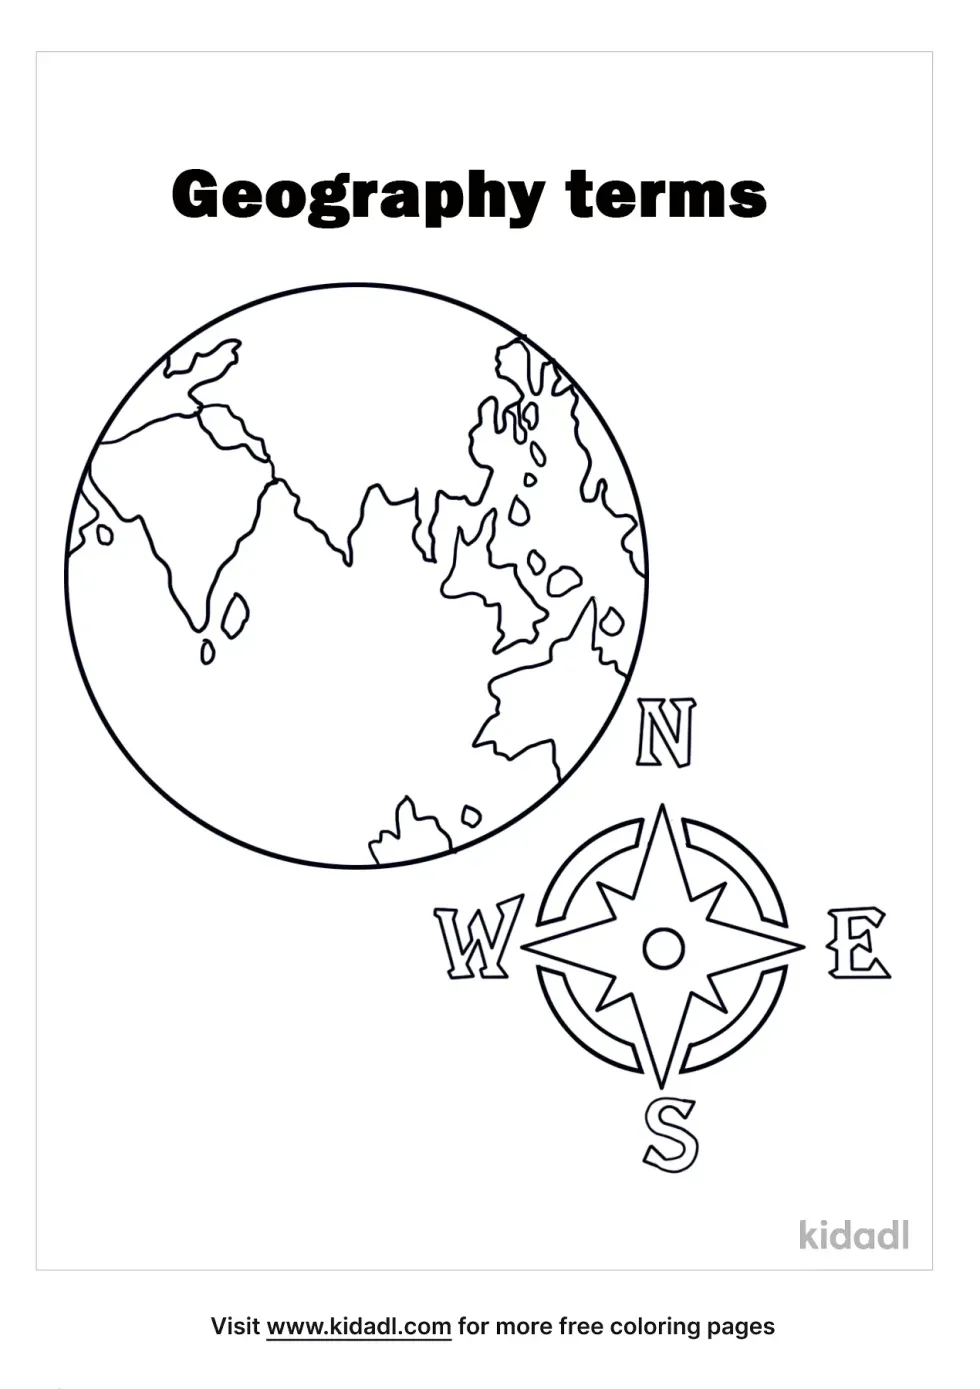 Geography Terms Coloring Page